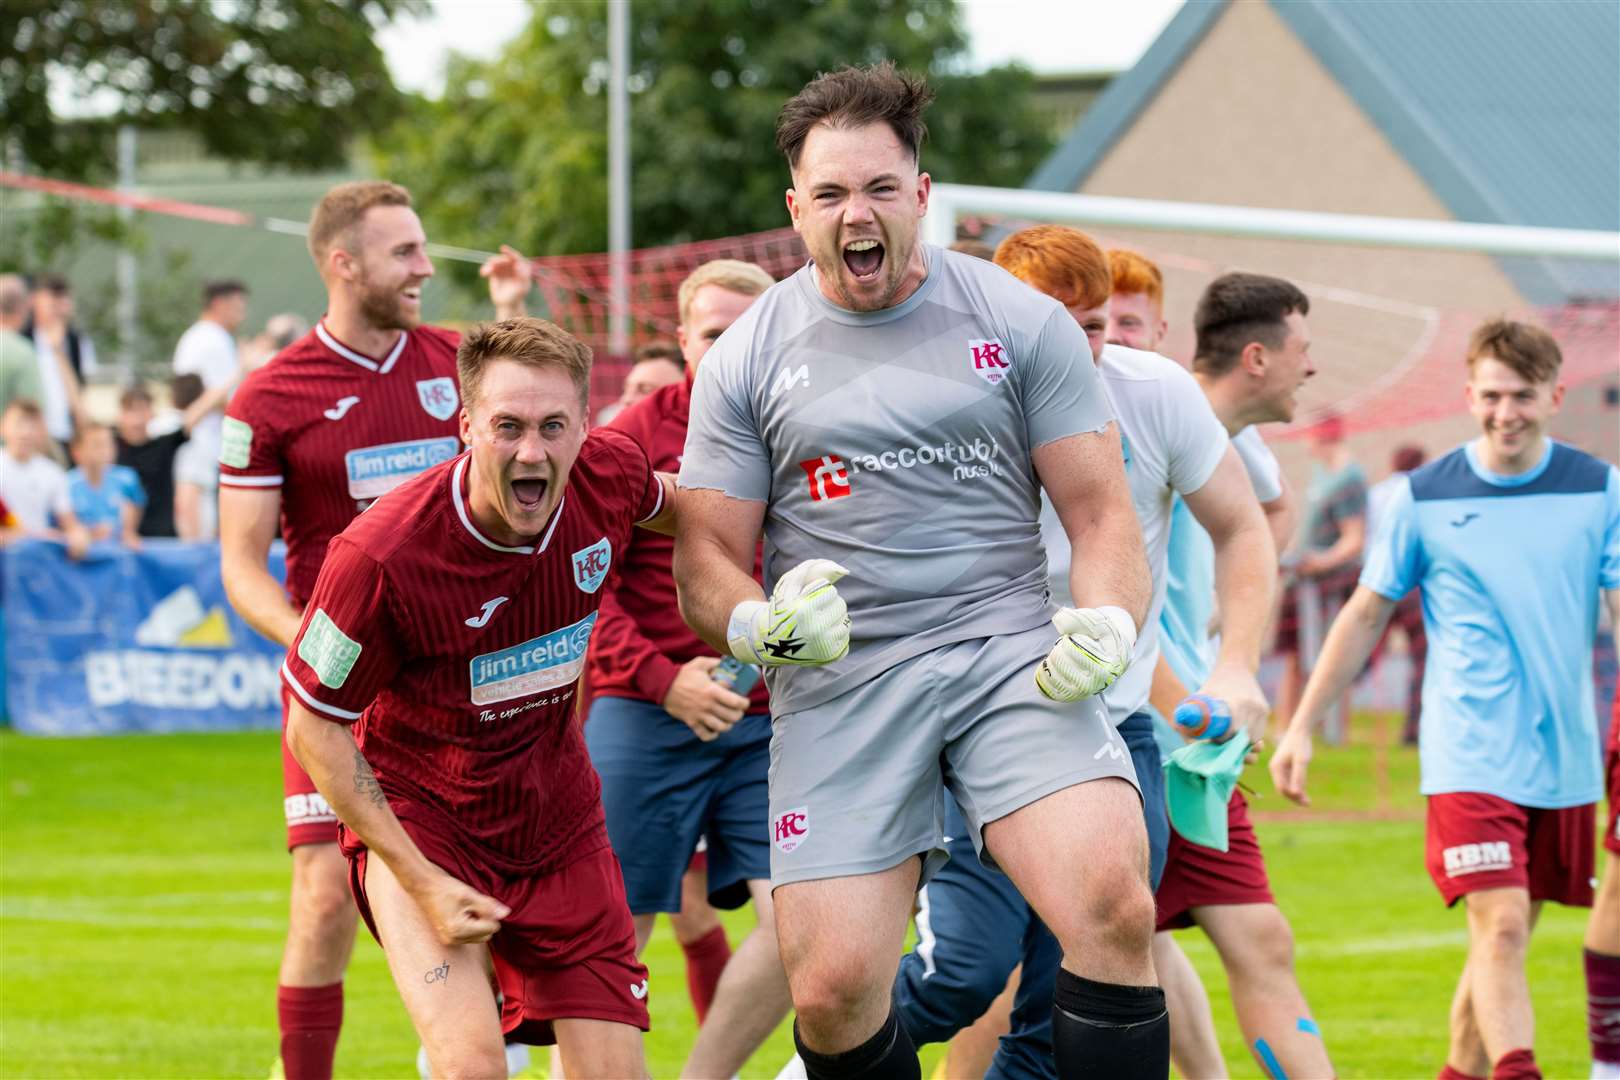 Craig Reid's goalscoring and penalty saving heroics have played a big part in Keith's surge in form. Picture: Beth Taylor